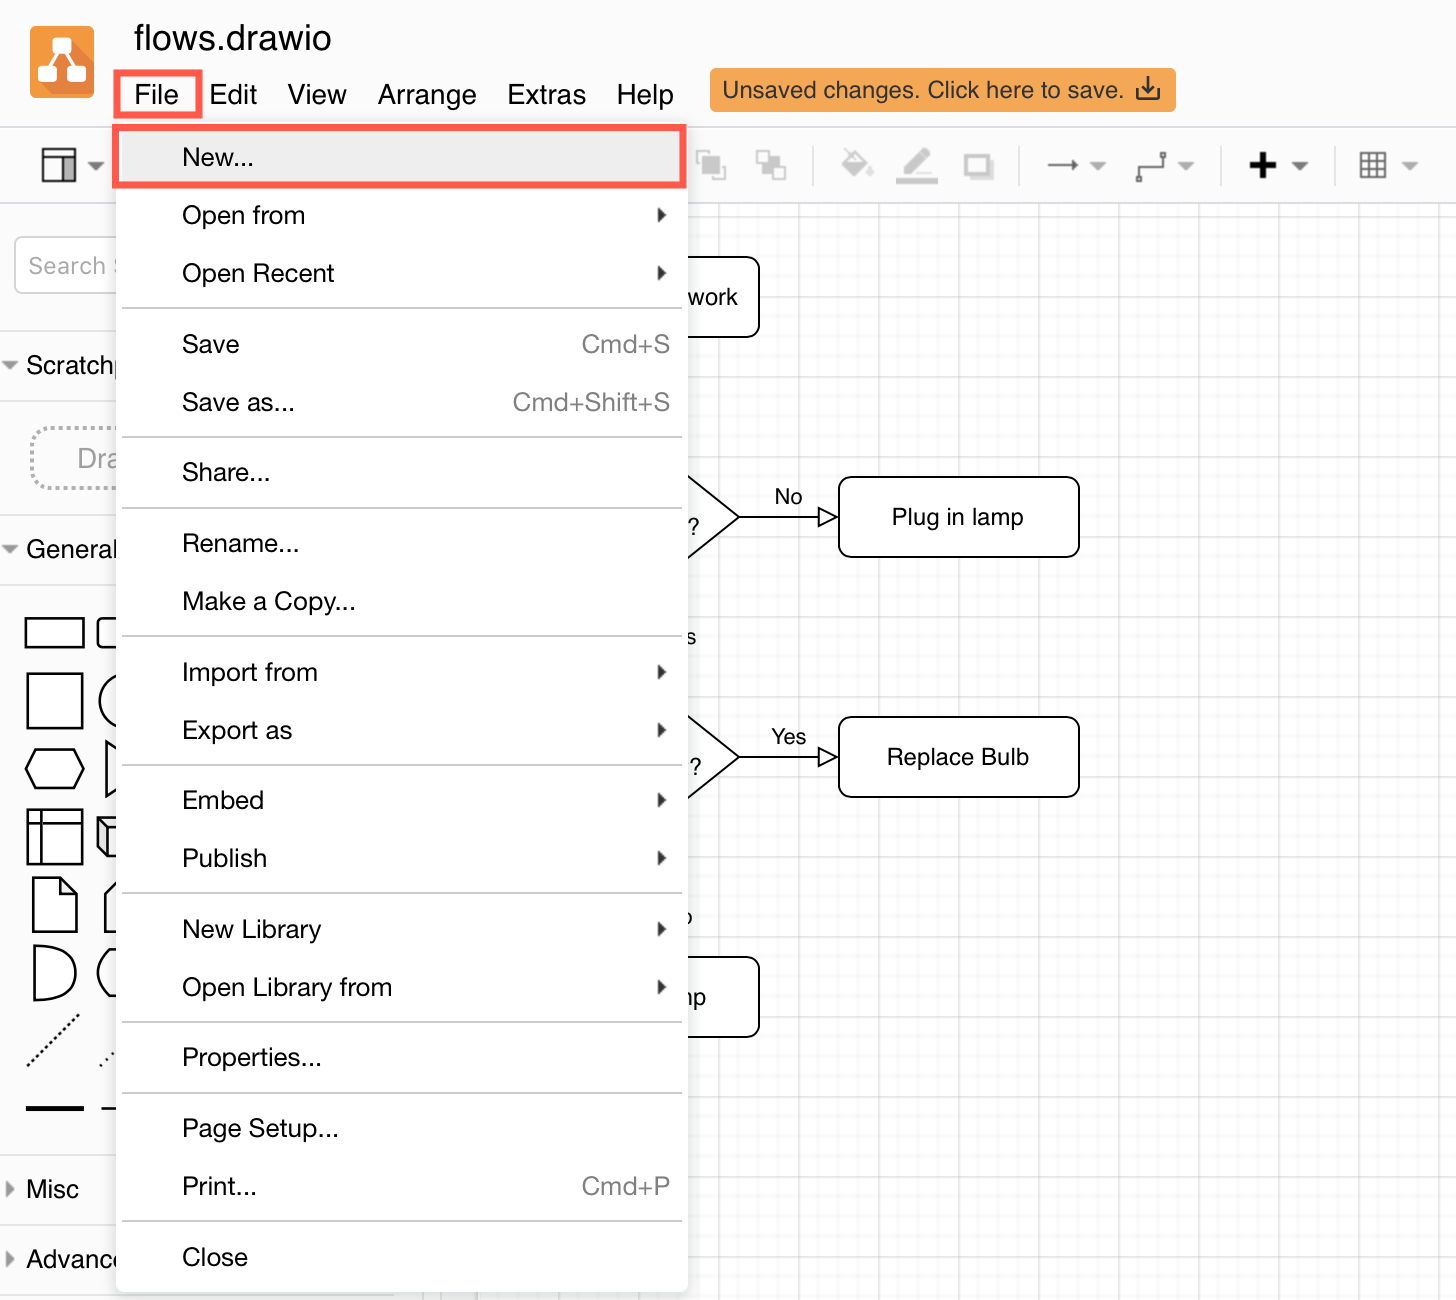 Select File > New within the diagrams.net editor to create a new diagram